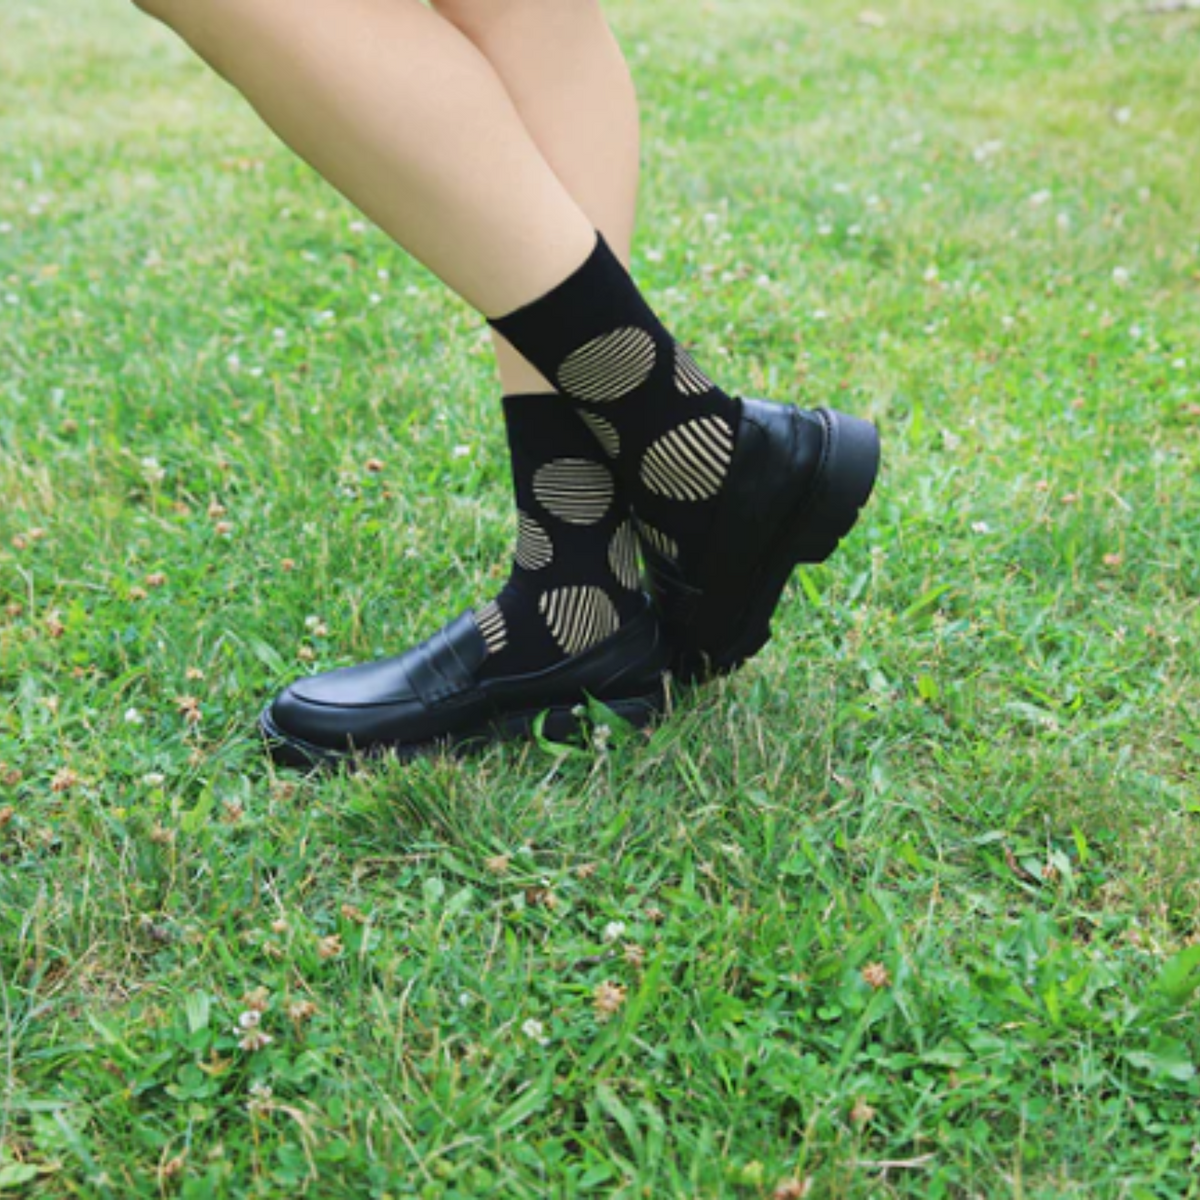 MeMoi Retro Circle women&#39;s Crew sock featuring black sock with brown stripes in circle patterns all over. Socks shown on model in grass.